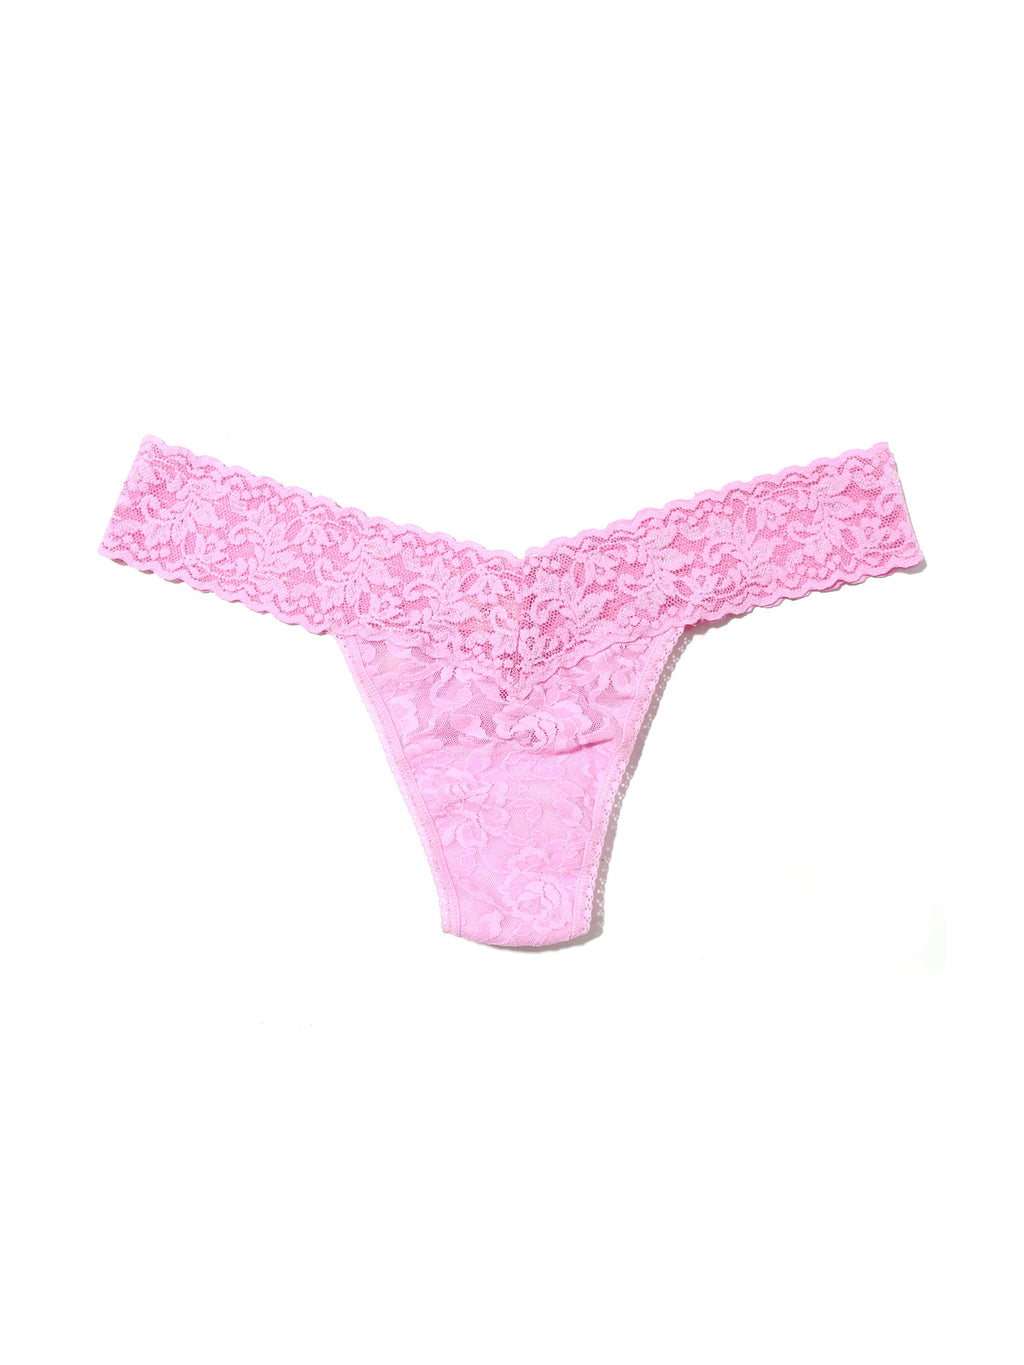 5 Cotton Low Rise Thong In Pink, Chateau pink, Lavender, Blue & Indigo –  BraTopia